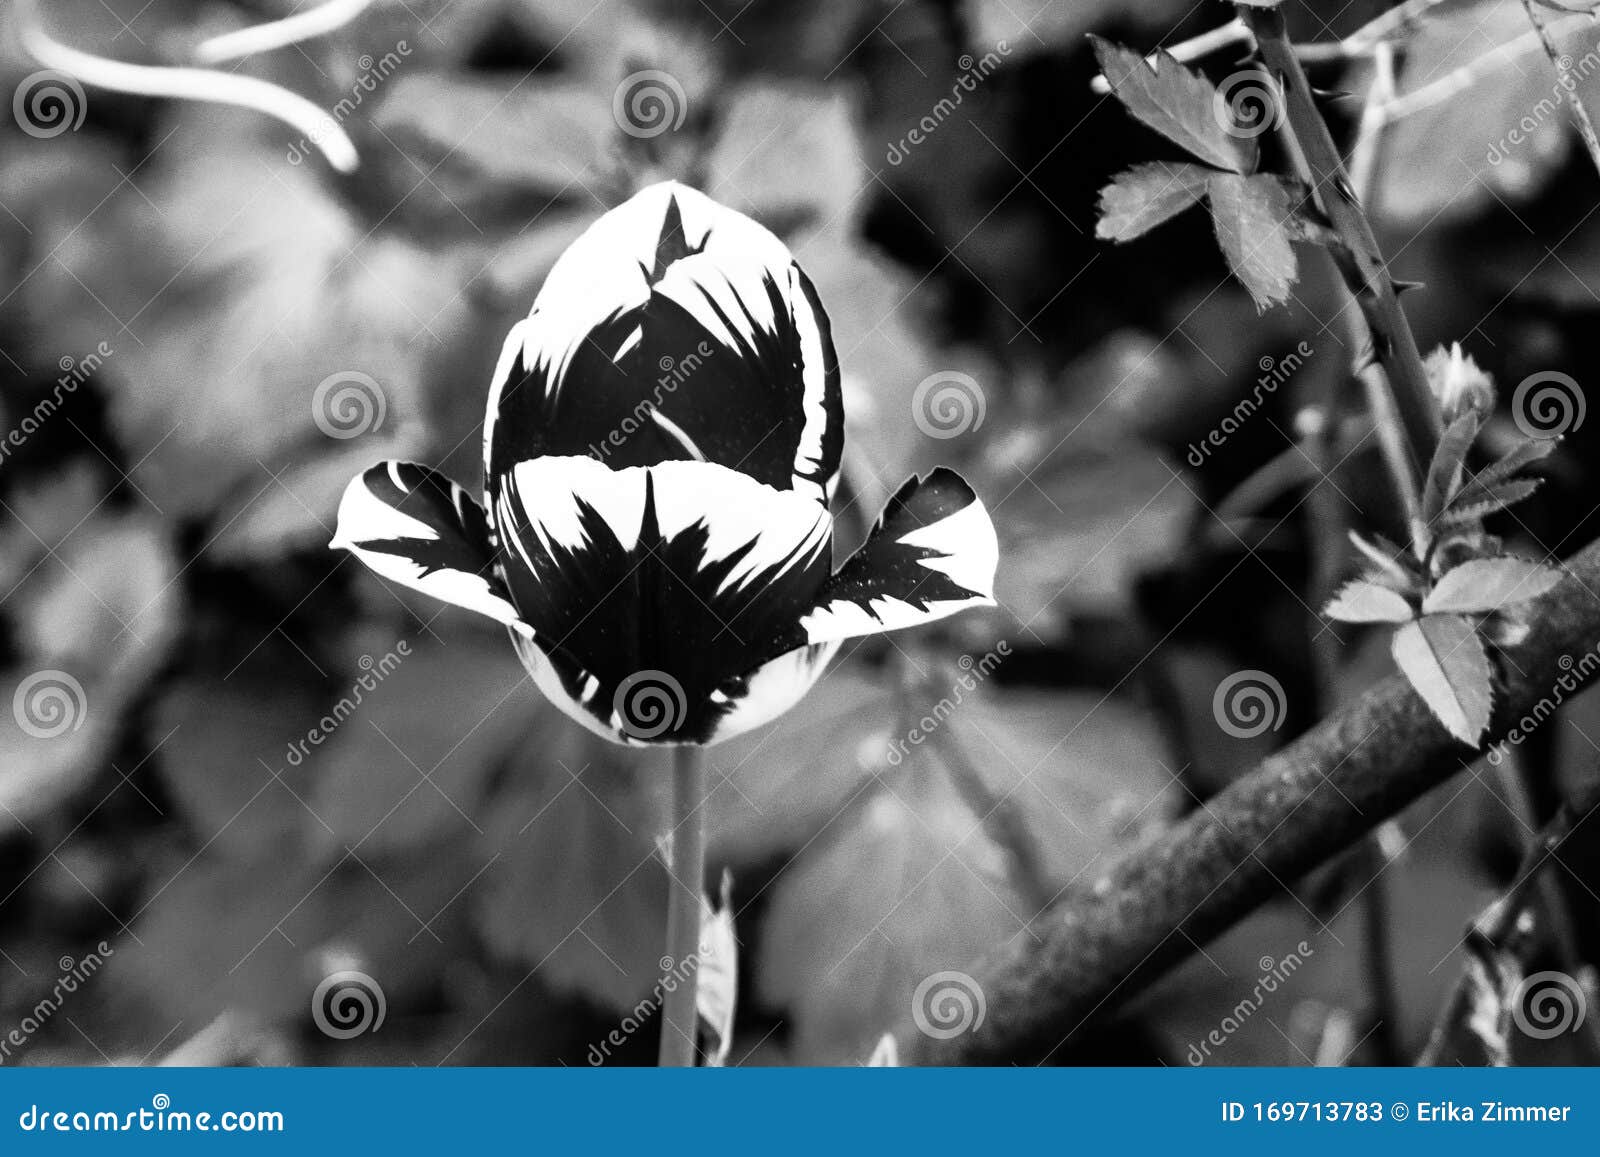 beautiful black and white tulips with blurred background